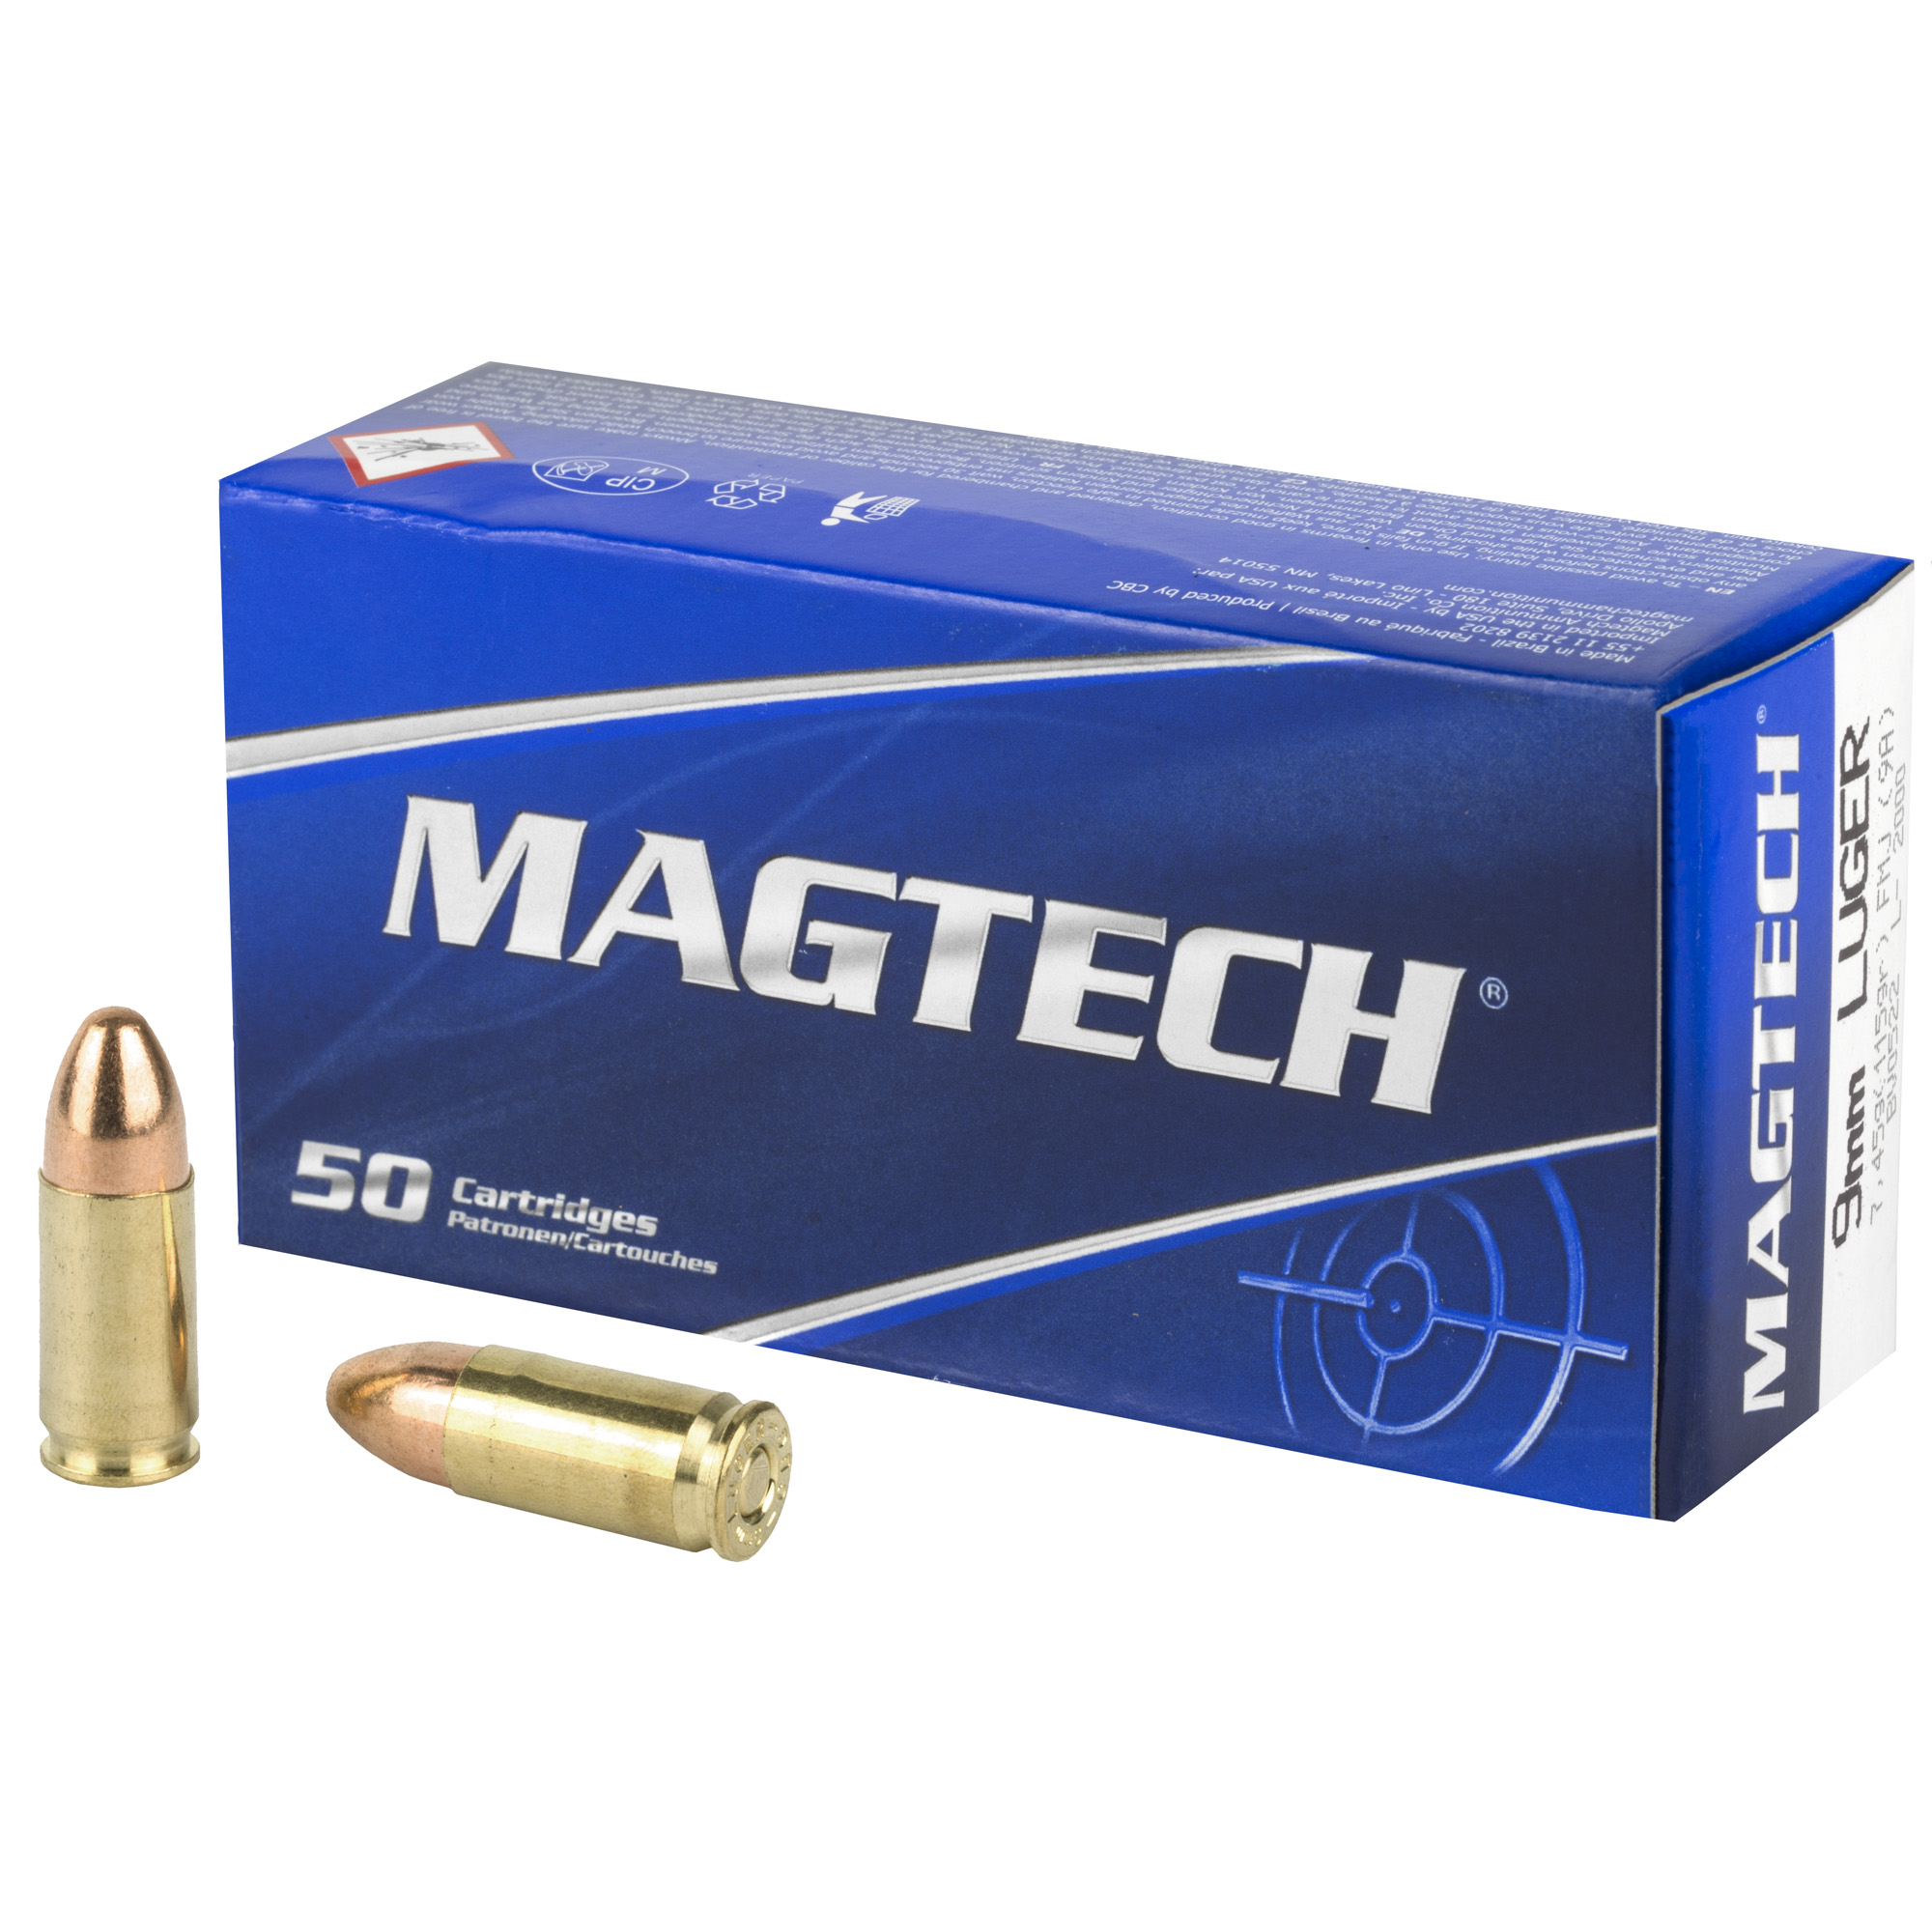 Magtech, Sport Shooting, 9MM, 115 Grain FMJ, Round Nose, Full Metal Case, 50 Round Box,  Case Pack 20-Boxes (1000Rds.), 9A,